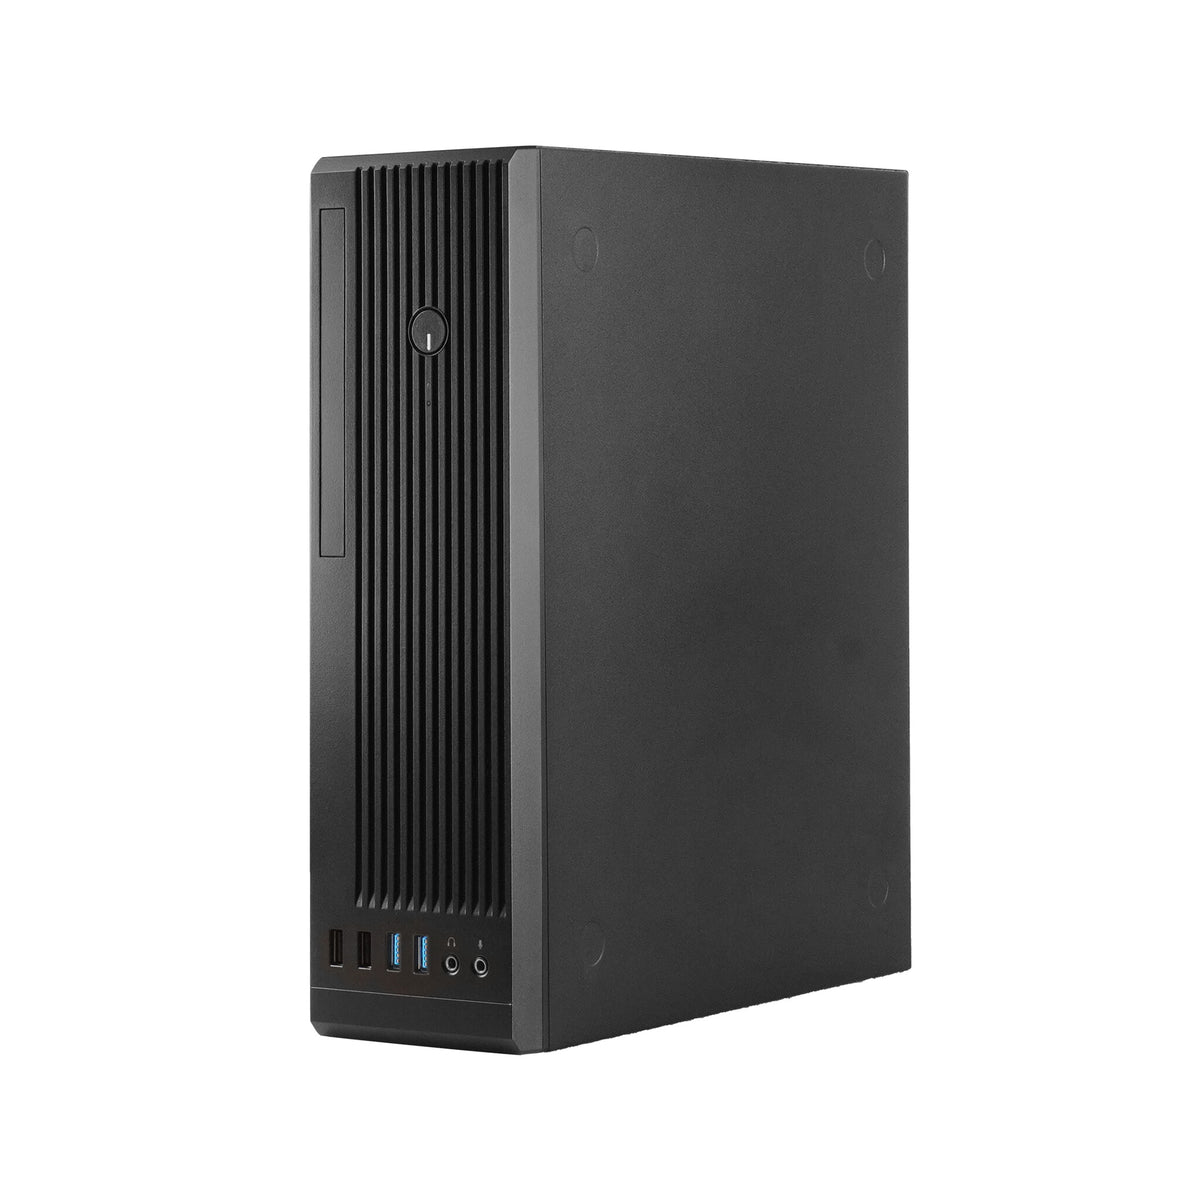 Chieftec BE-10B-300 Small Form Factor Case in Black